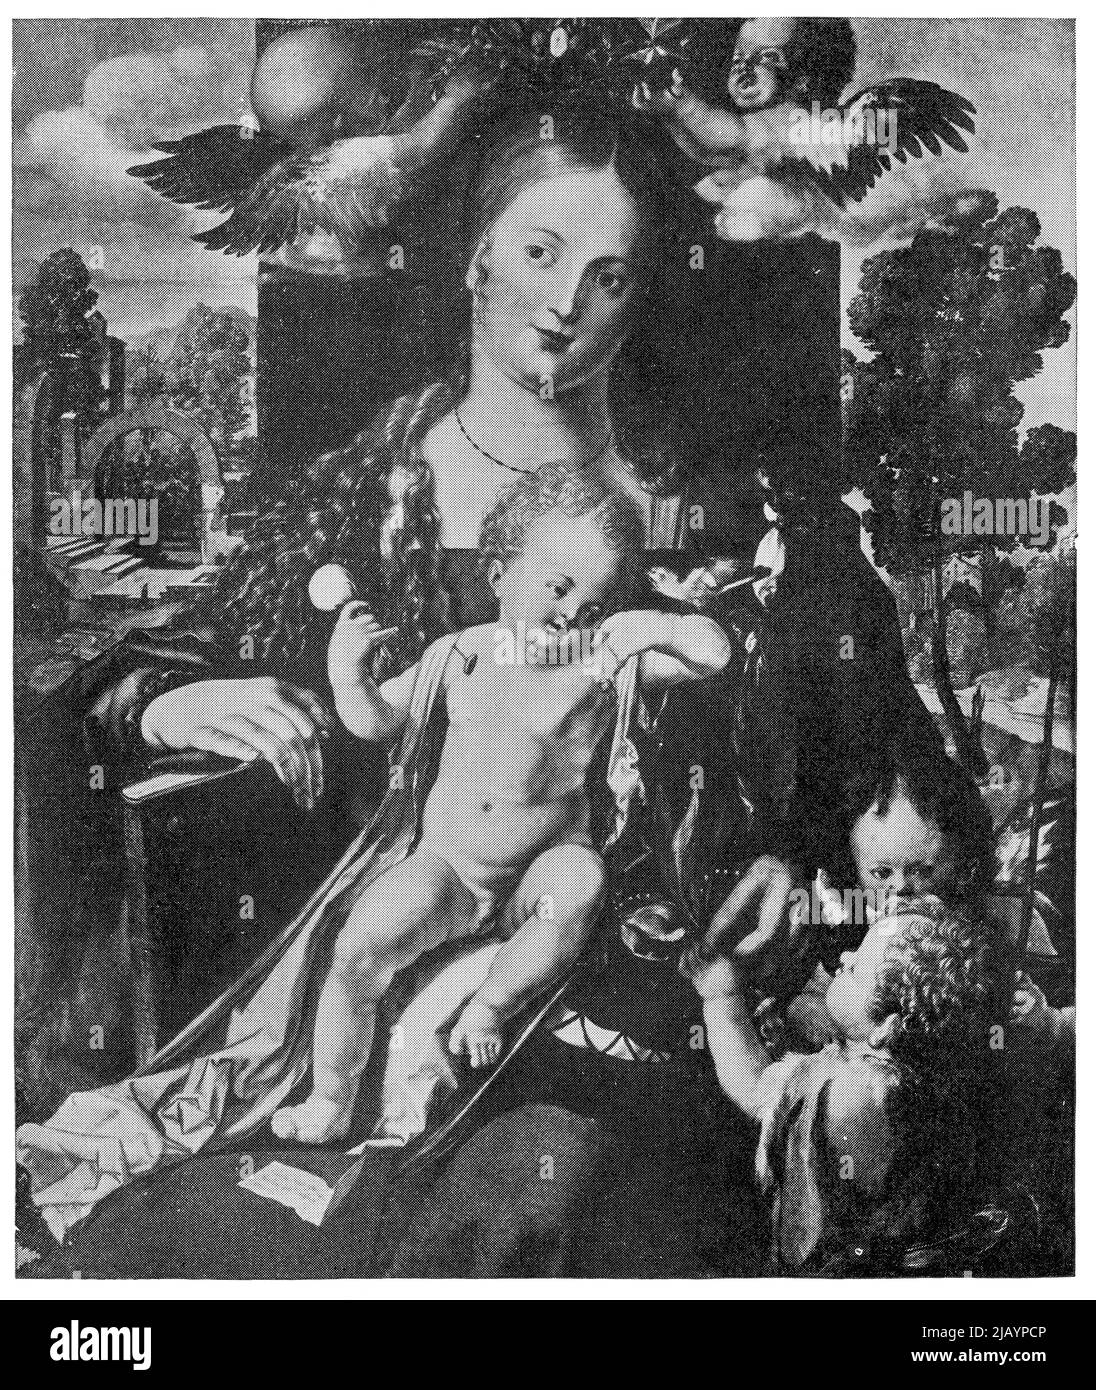 Madonna with the Siskin by a German painter Albrecht Duerer. Publication of the book 'Meyers Konversations-Lexikon', Volume 2, Leipzig, Germany, 1910 Stock Photo